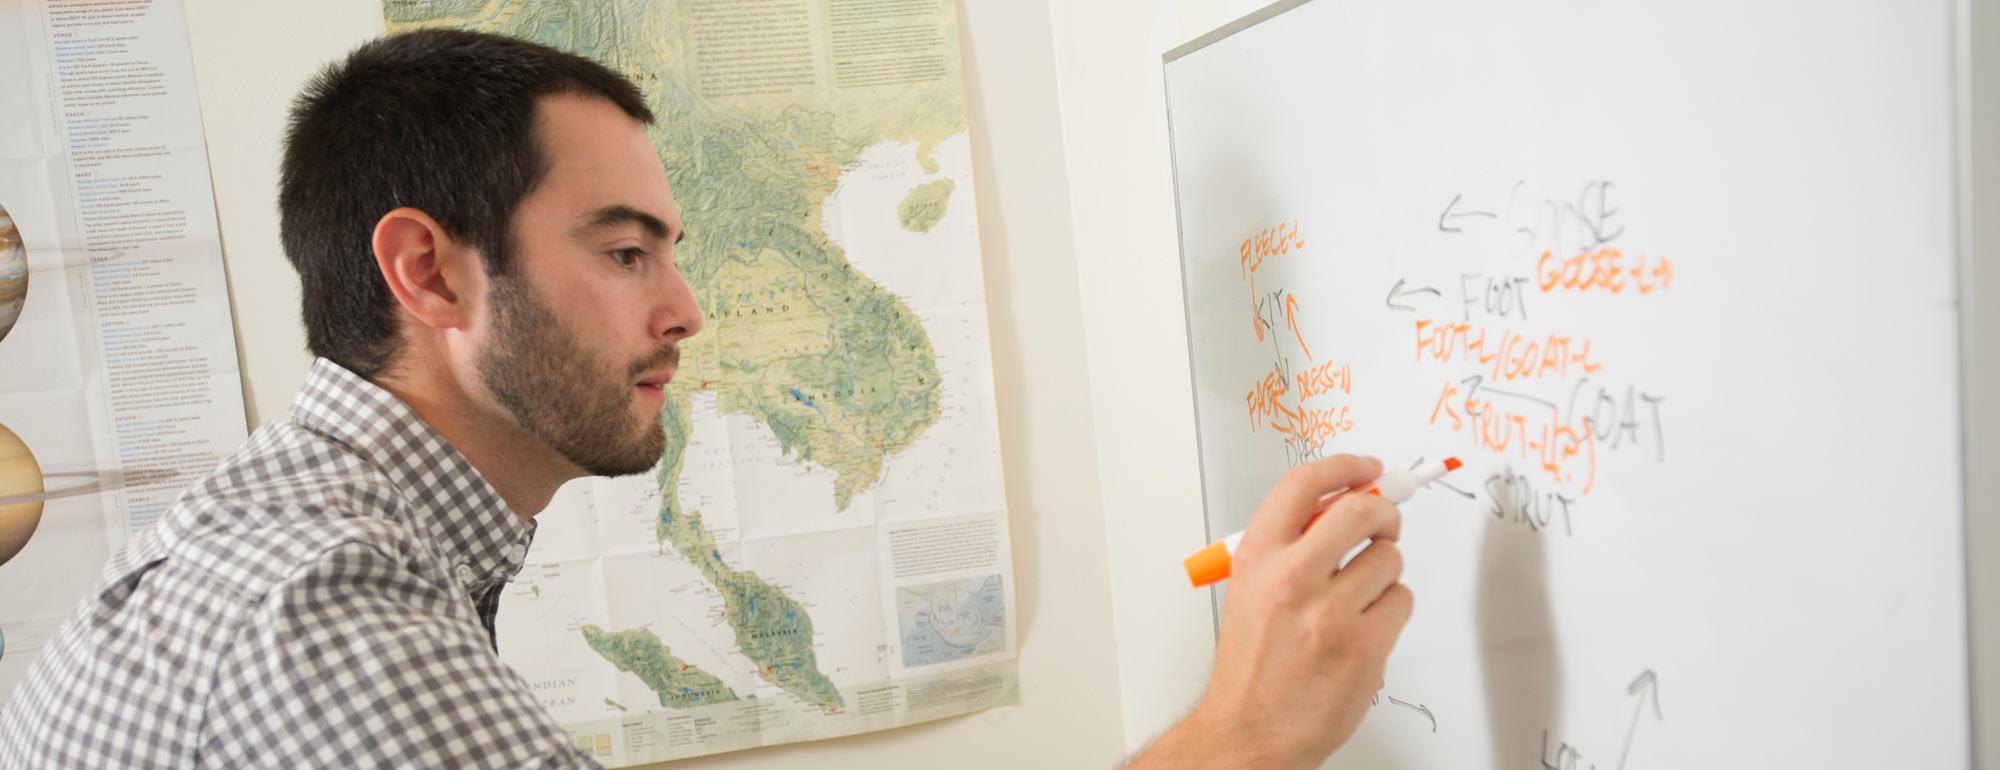 A PHD candidate evaluates word structure on a whiteboard